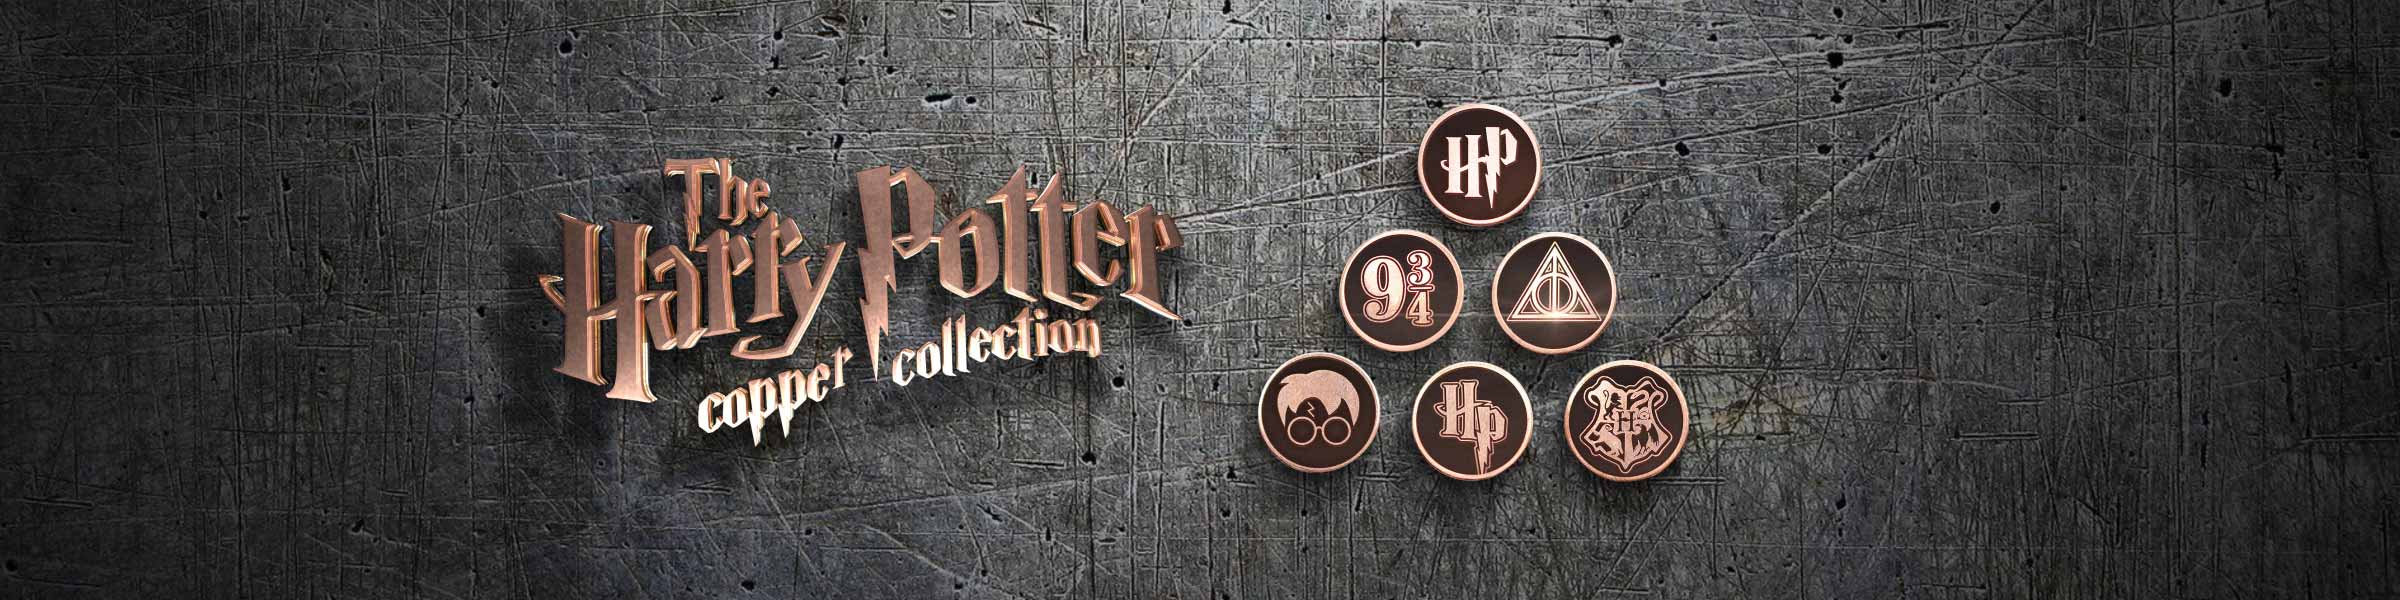 Harry Potter Copper Pin Collection Promotion Main Hero